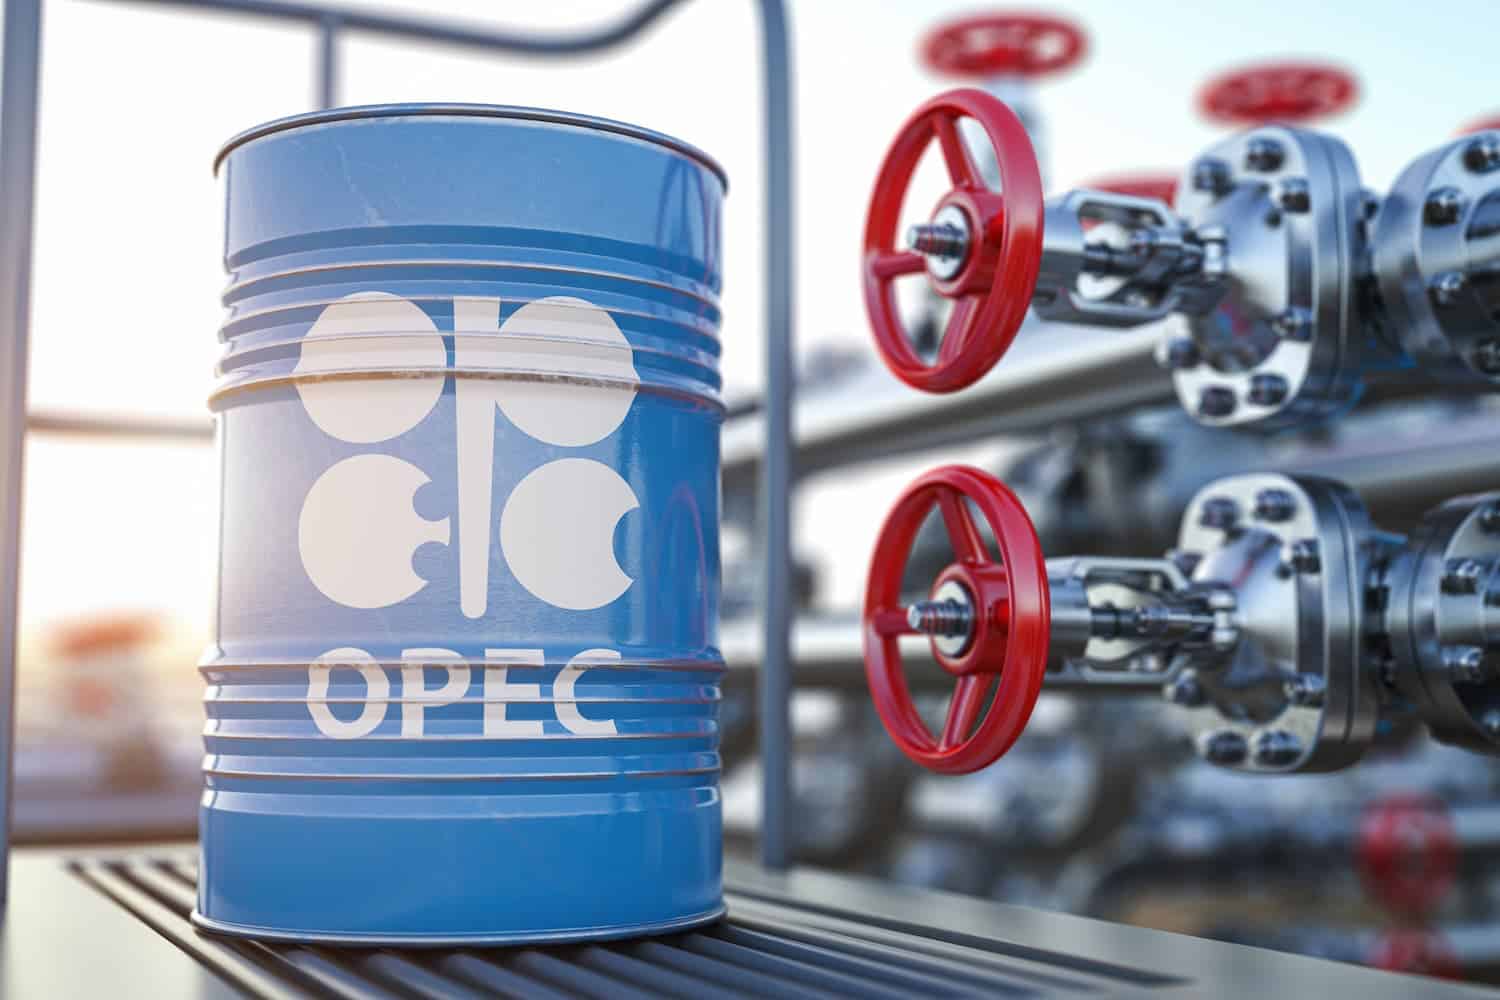 Opec symbol on the oil barrel and oil pipe line valve in front of the barrels